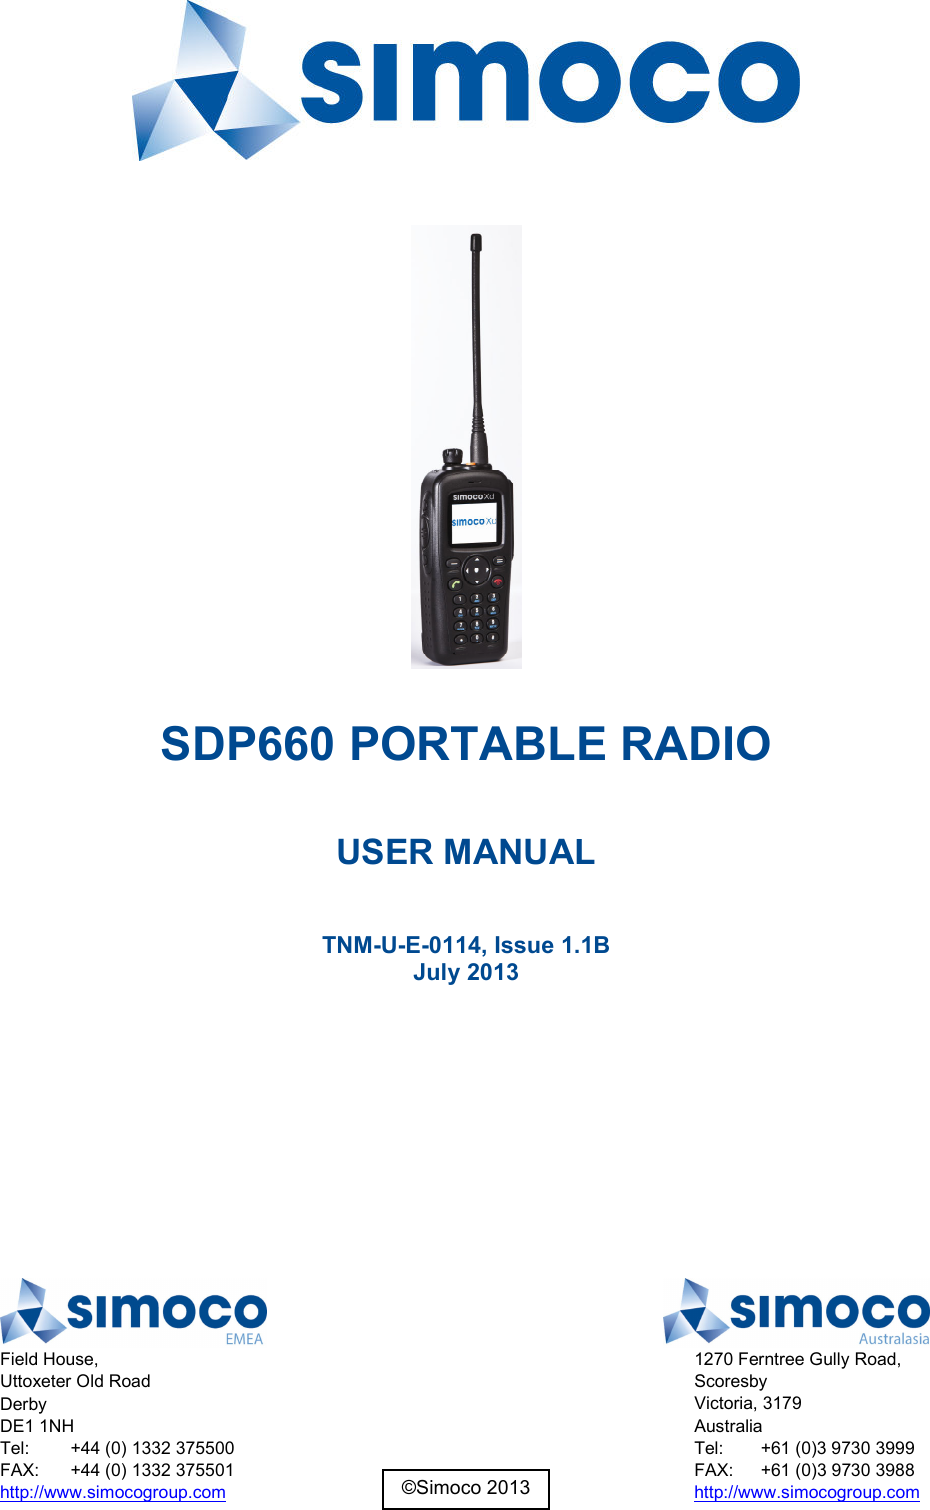   SDP660 PORTABLE RADIO  USER MANUAL  TNM-U-E-0114, Issue 1.1B July 2013     Field House, Uttoxeter Old Road Derby DE1 1NH Tel:  +44 (0) 1332 375500 FAX:  +44 (0) 1332 375501 http://www.simocogroup.com  1270 Ferntree Gully Road, Scoresby Victoria, 3179 Australia Tel:  +61 (0)3 9730 3999 FAX:  +61 (0)3 9730 3988 http://www.simocogroup.com ©Simoco 2013 